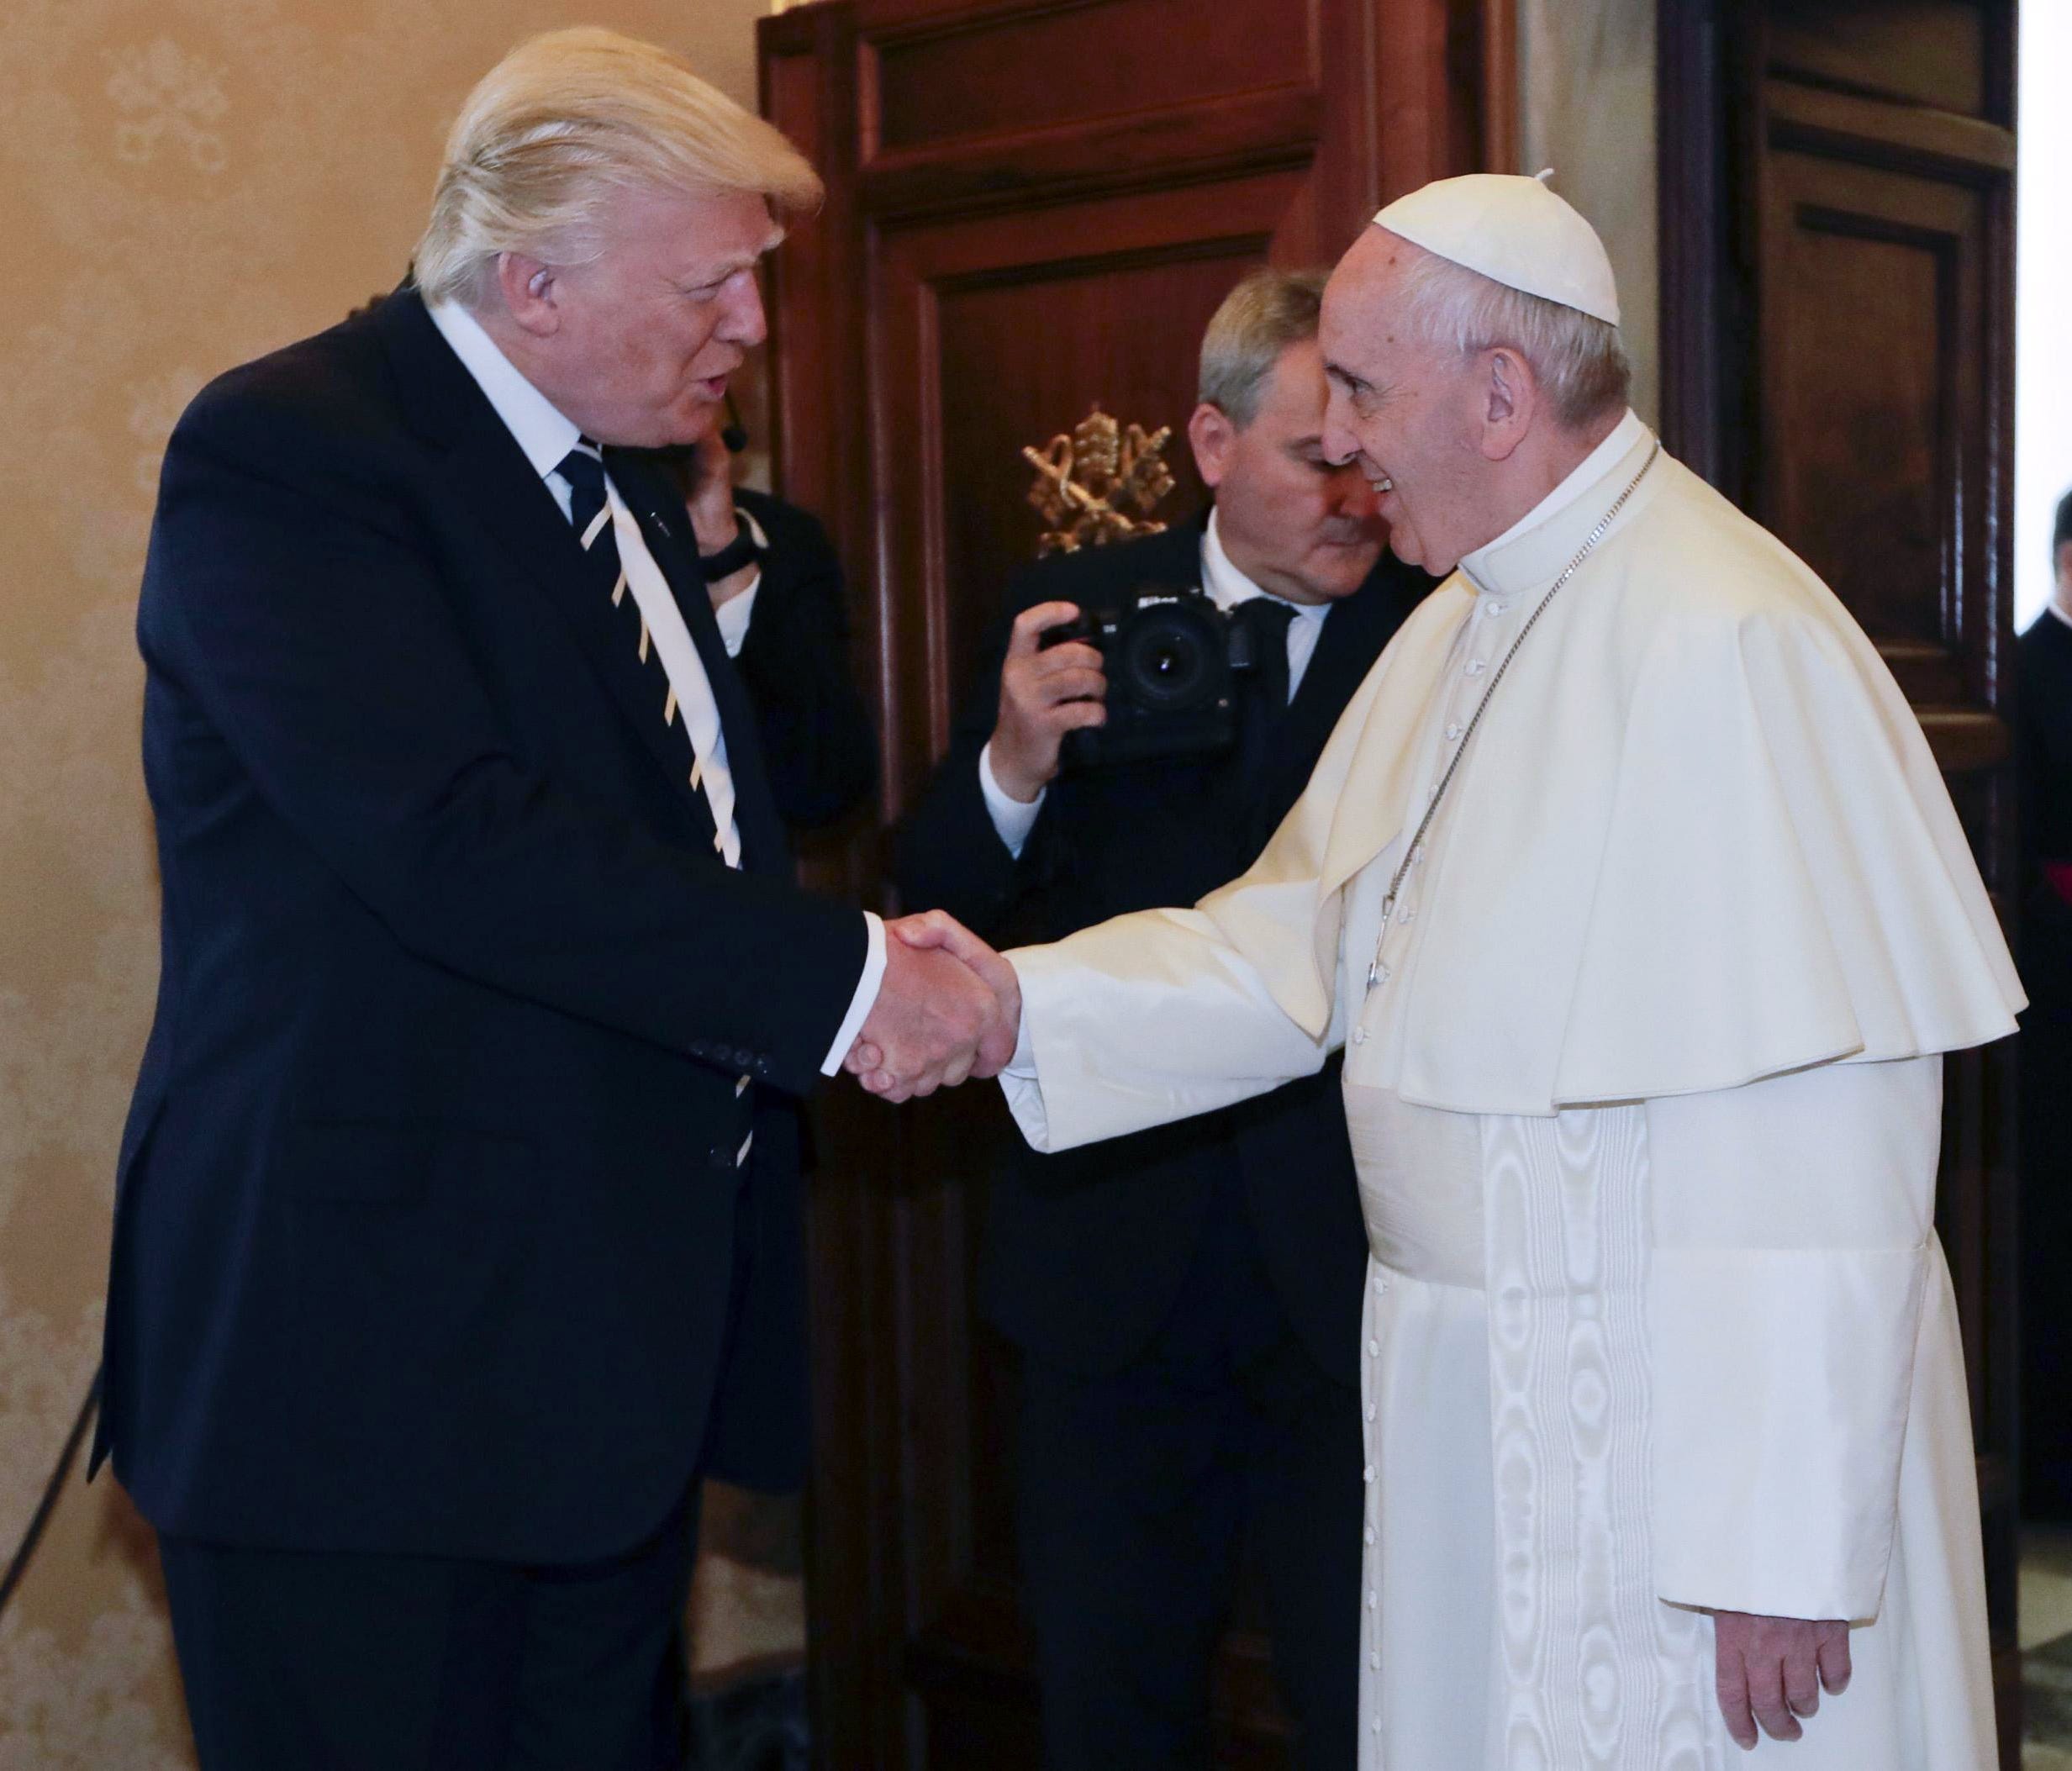 Pope Francis shakes hands with President Trump on the occasion of their private audience at the Vatican in Vatican City, May 24, 2017.